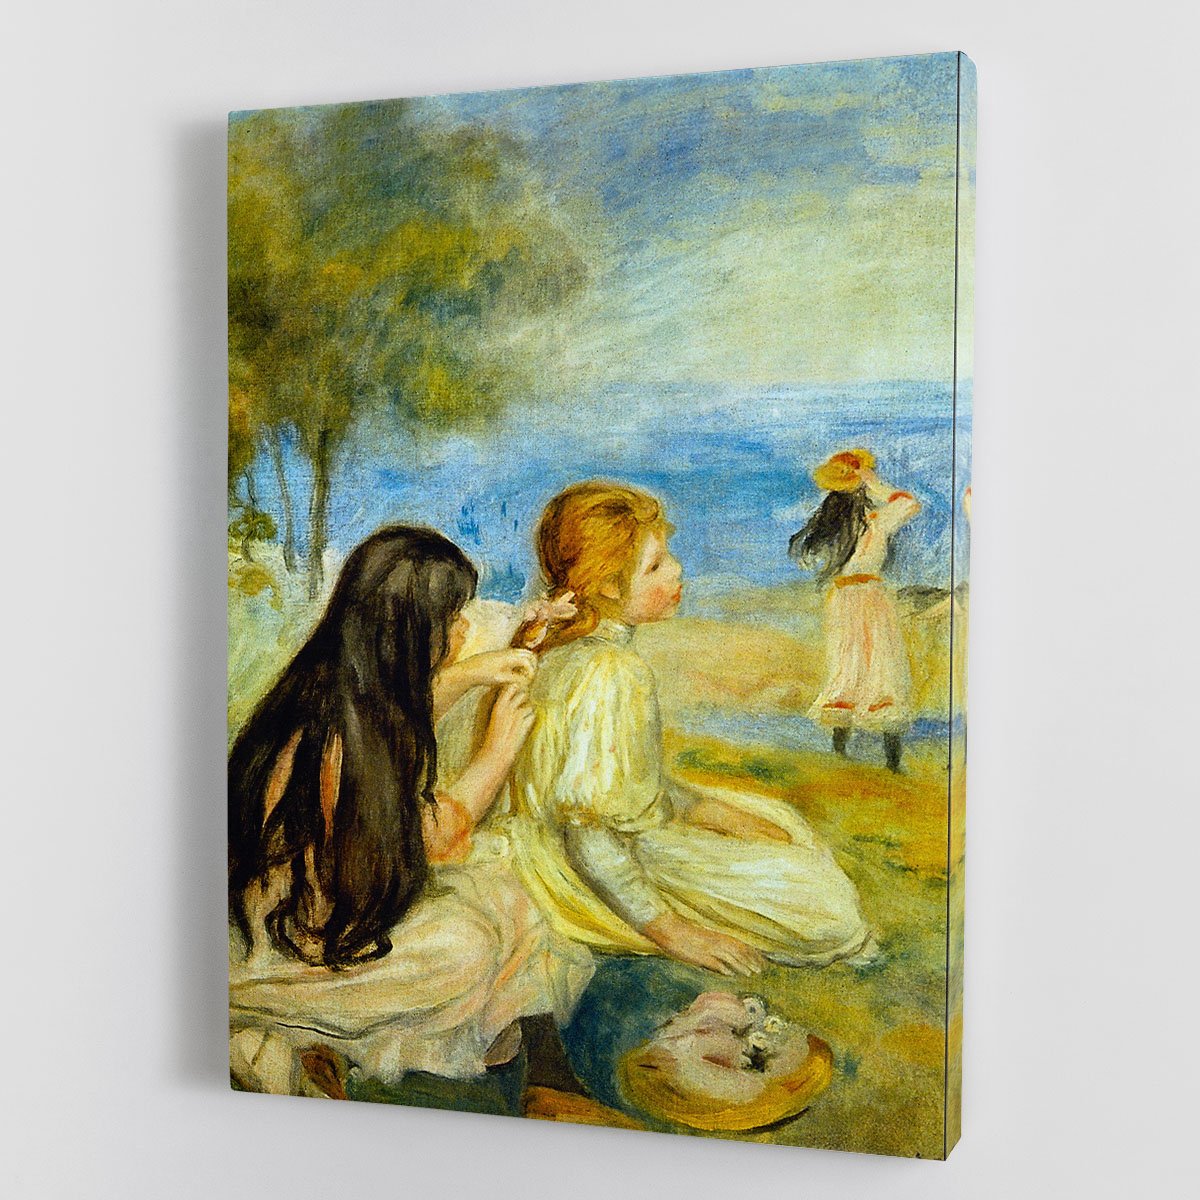 Girls by the Seaside by Renoir Canvas Print or Poster